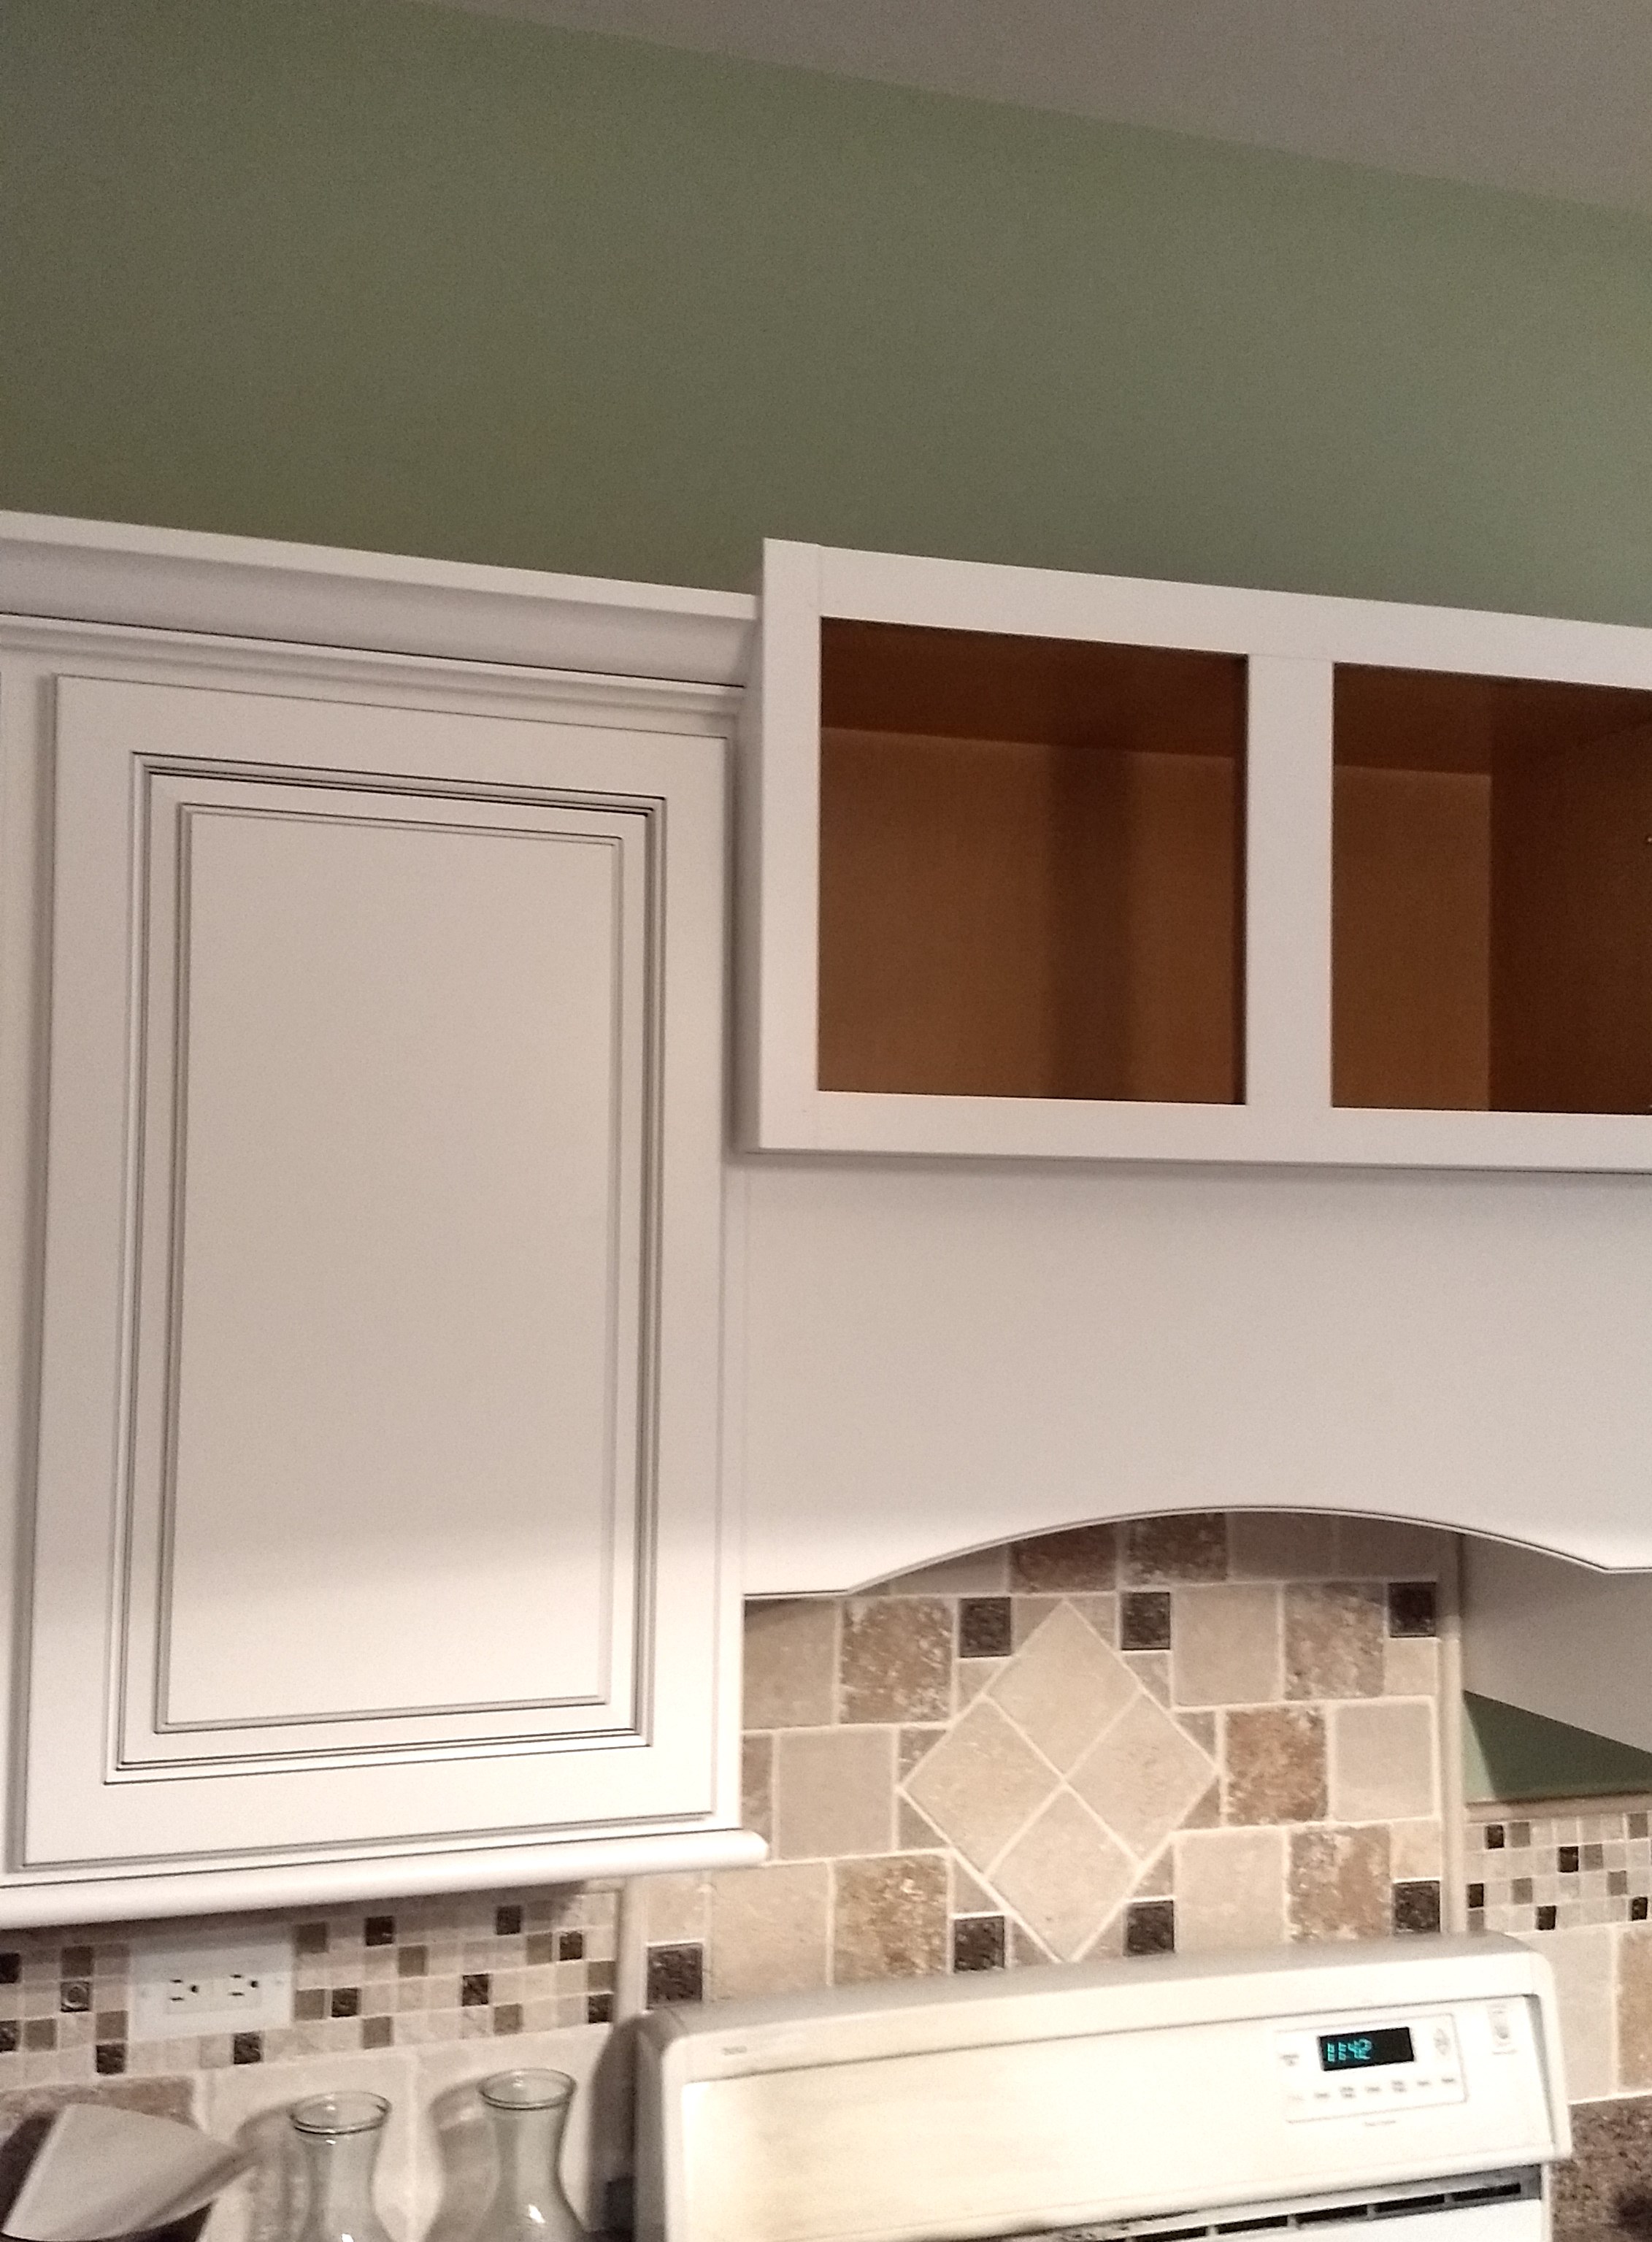 Step 7: I'm in the process of refacing the center cabinet and added a valance below to conceal a new vent